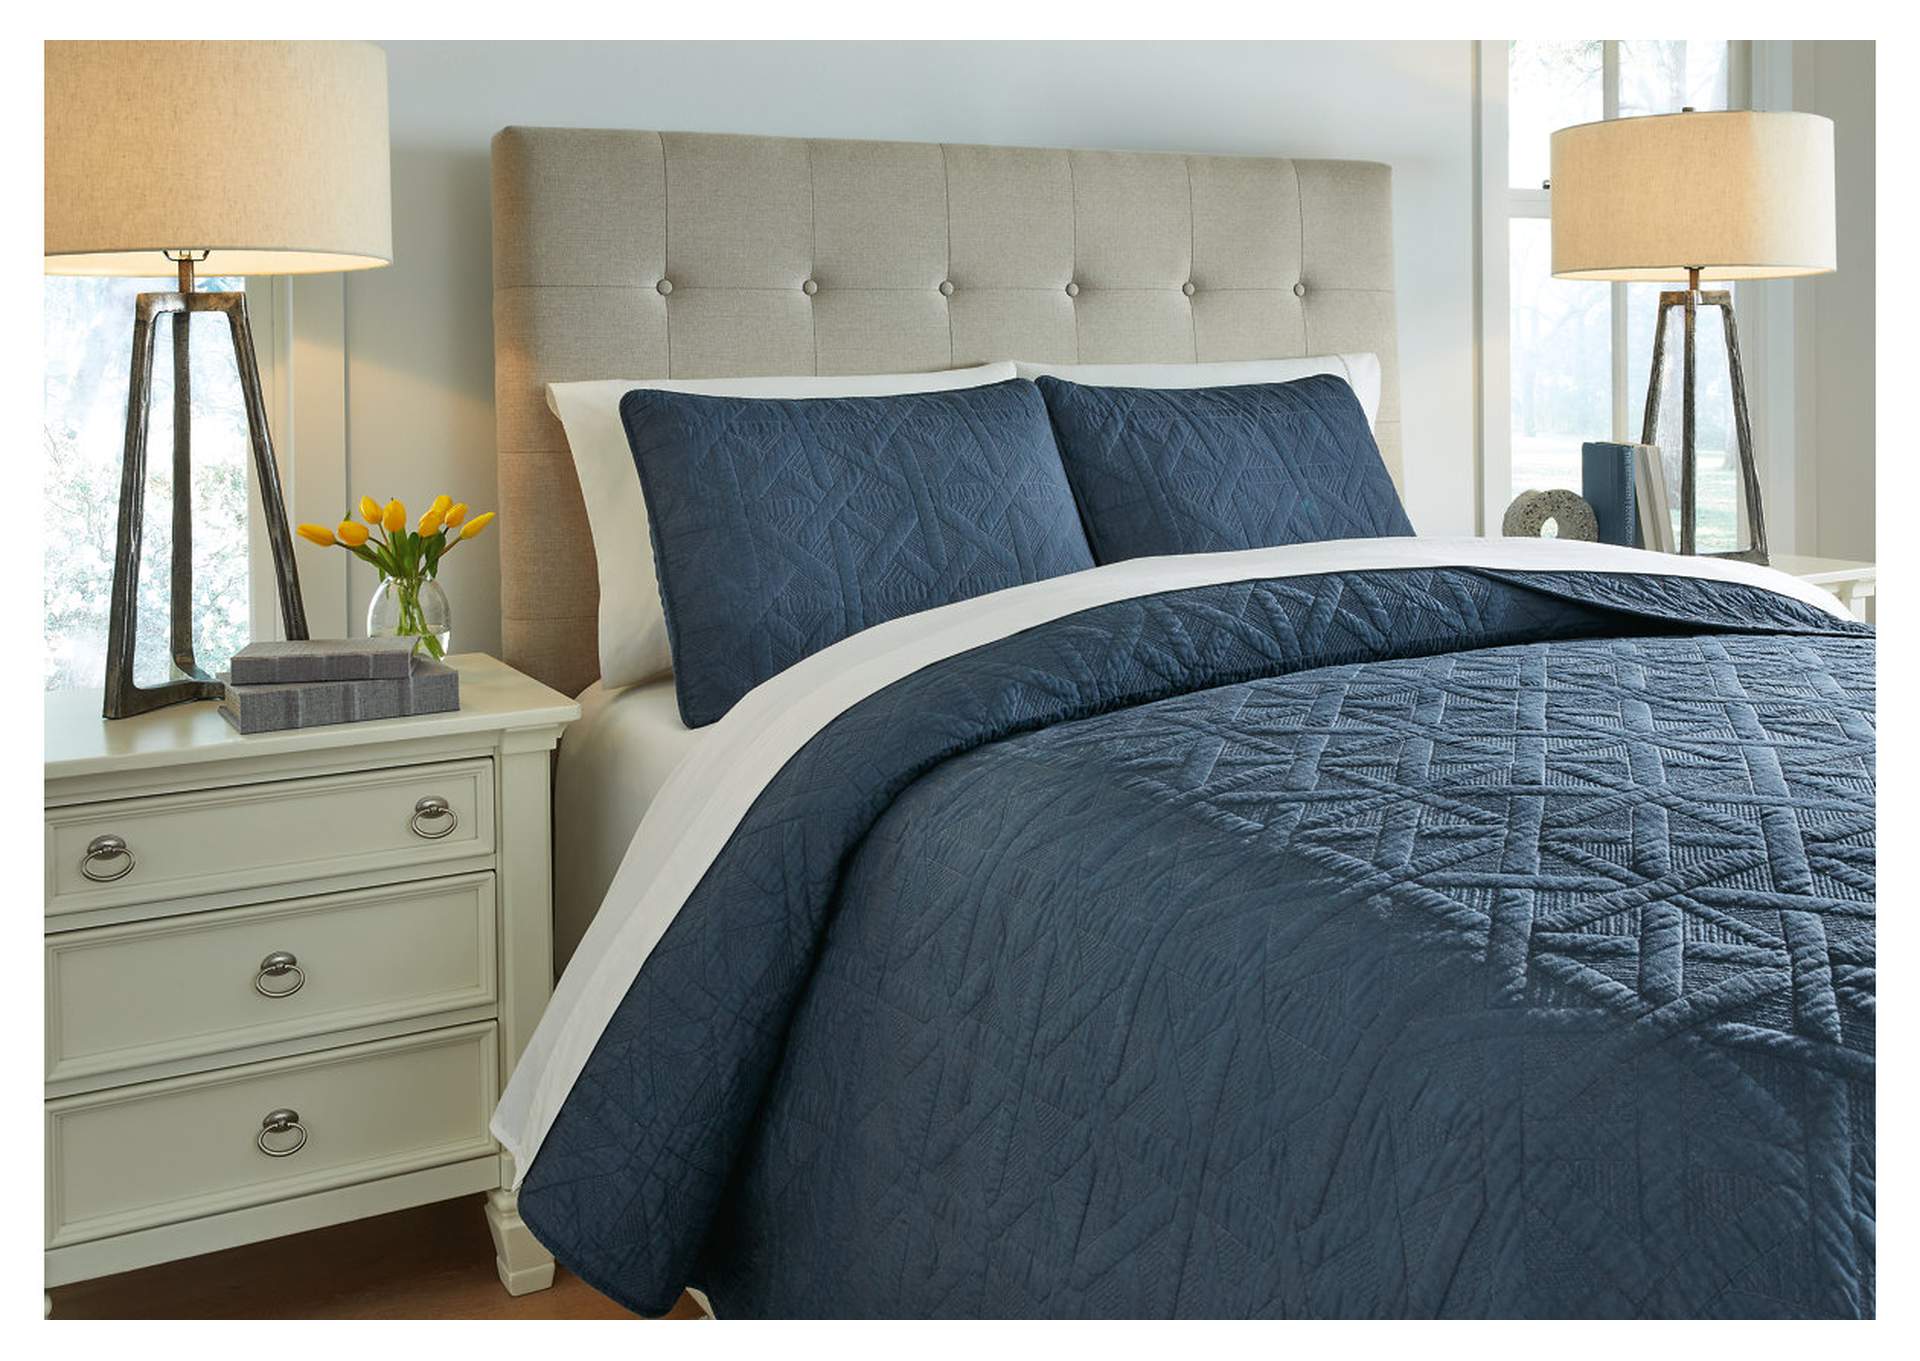 Guslea King Coverlet Set,Signature Design By Ashley